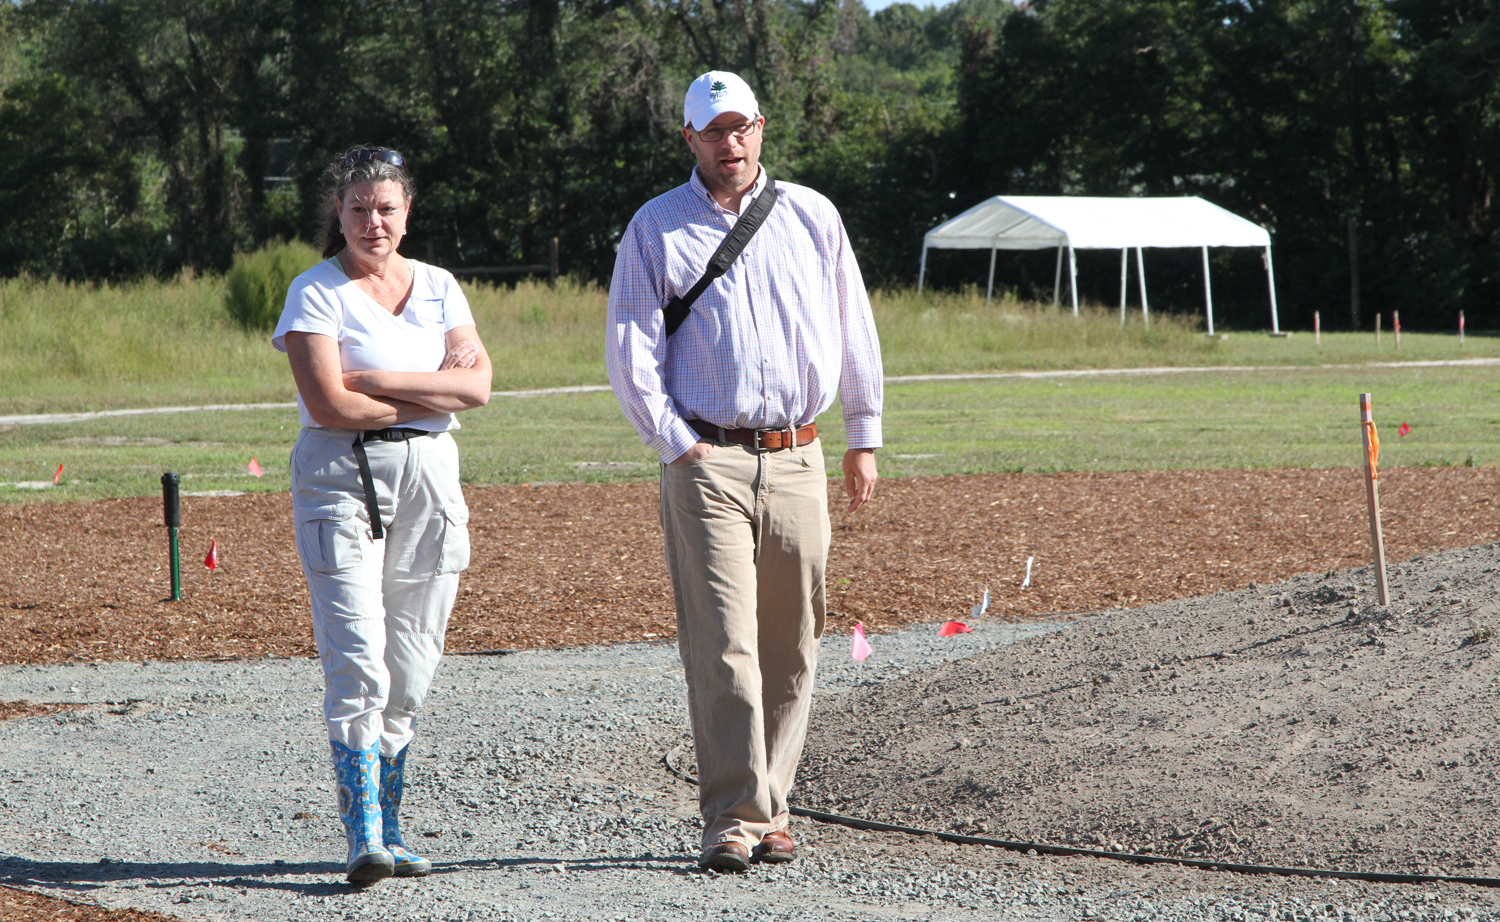 DBG Board Member Janet Point discusses the meadow with Richard Olsen, Director of the US National Arboretum.